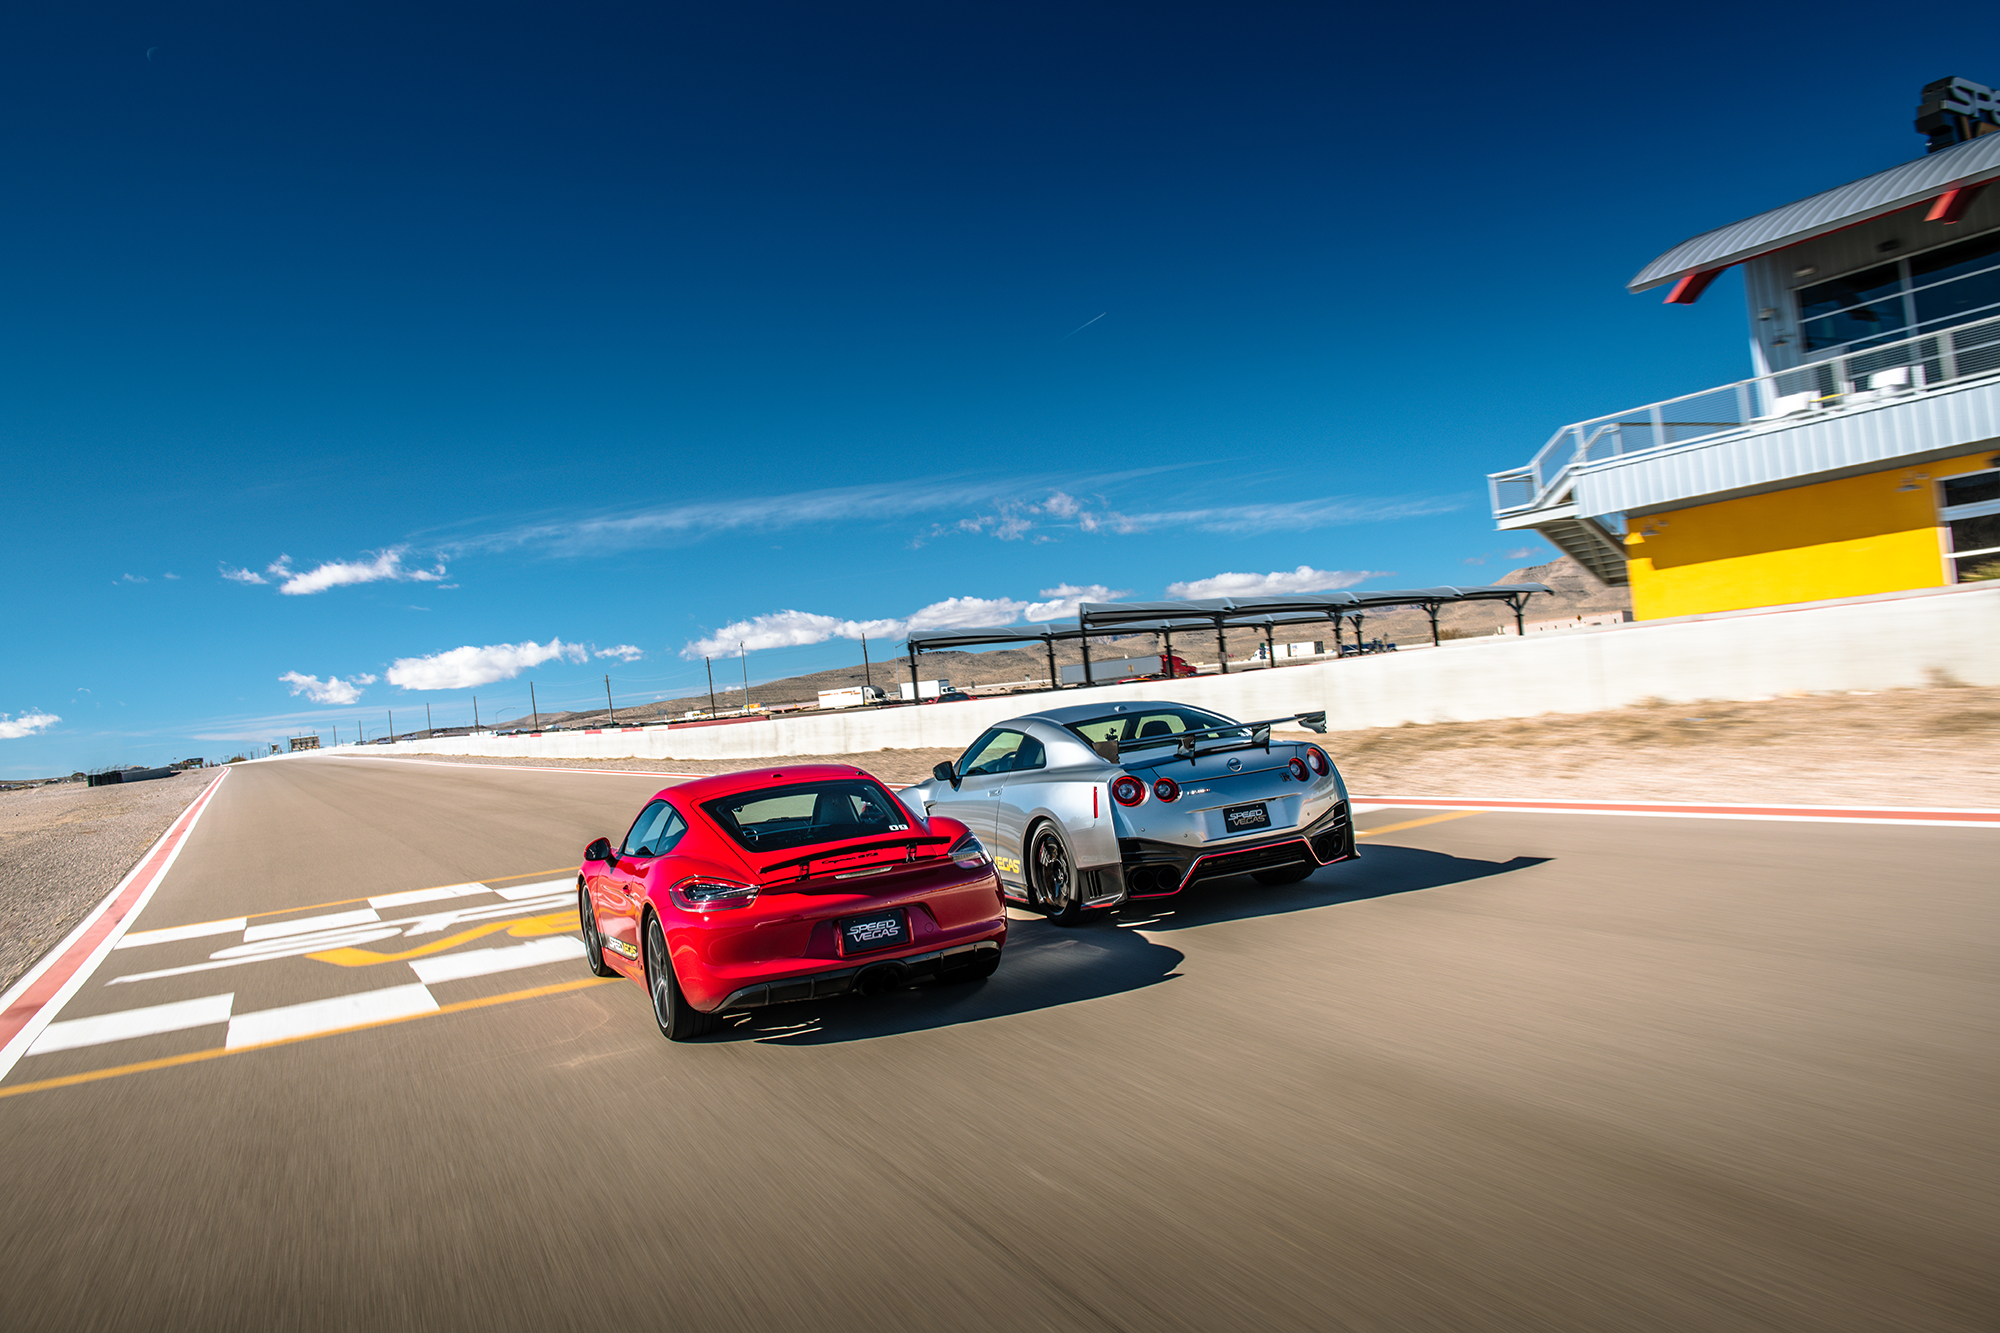 Two exotic sportscars racing next to each other on a track beneath a blue sky. 